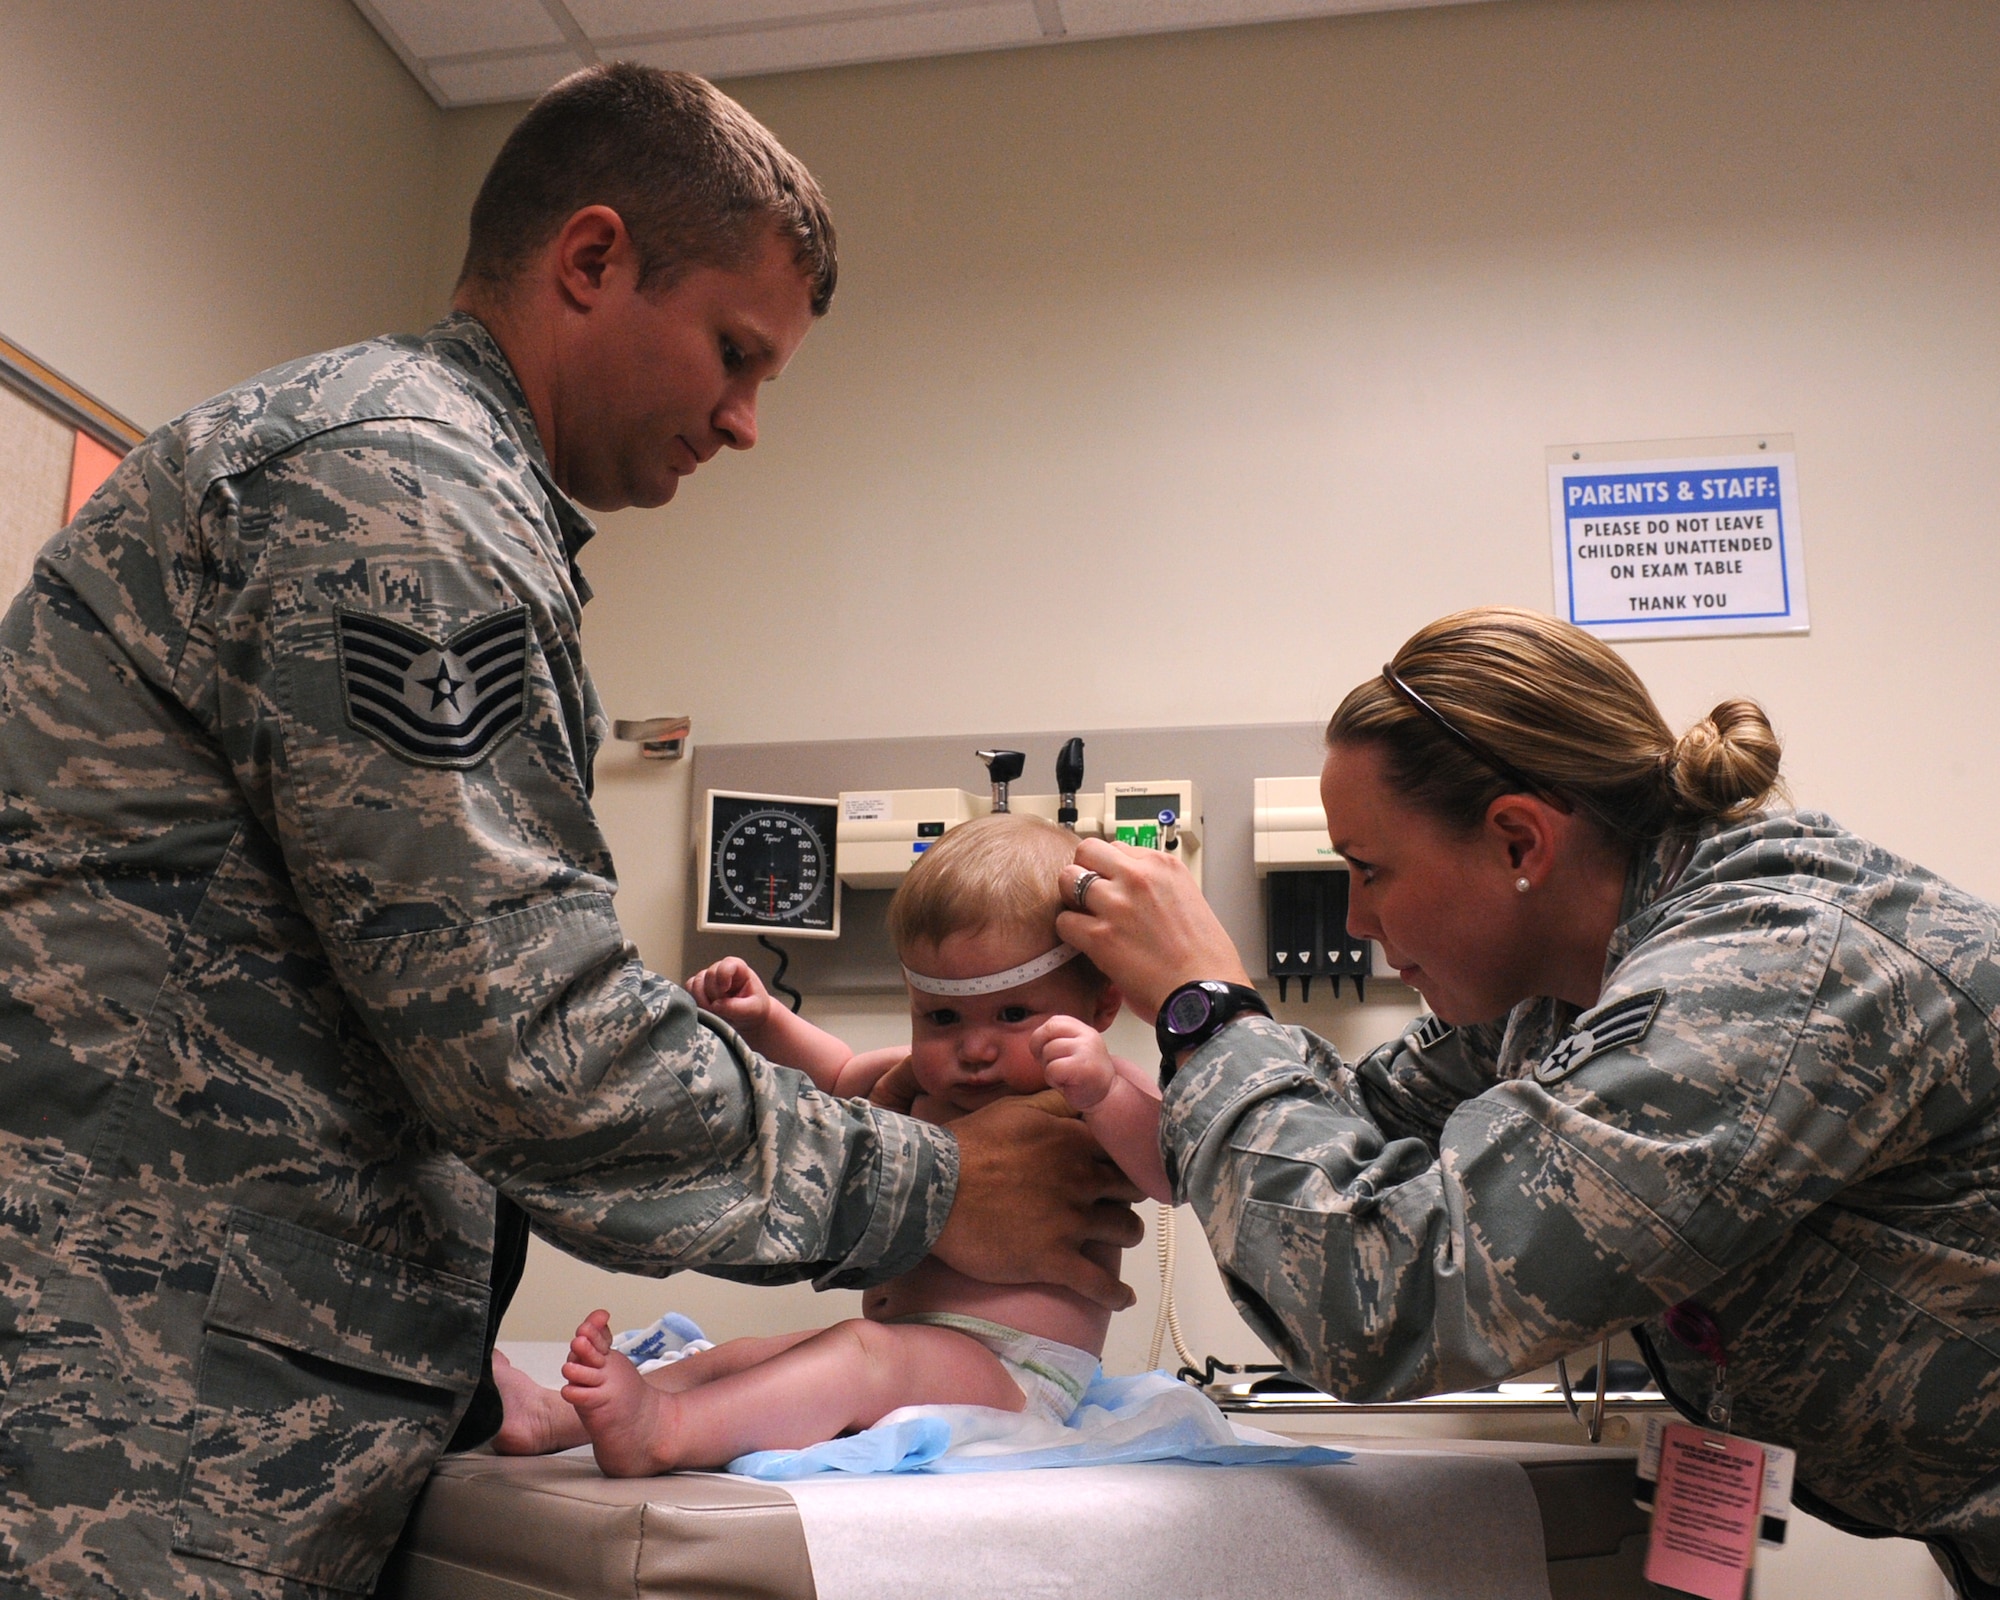 U.S. Air Force Senior Airman Brittany Harmening, 355th Medical Operations Squadron aerospace medical technician, measures an infant patient's head at the 355th Medical Group at Davis-Monthan Air Force Base, Ariz., June 26, 2013. The 355th MDOS provides medical care to maximize the health and welfare of current and retired warriors and their family members, both in theater and at home.  (U.S. Air Force photo by Senior Airman Christine Griffiths/Released)